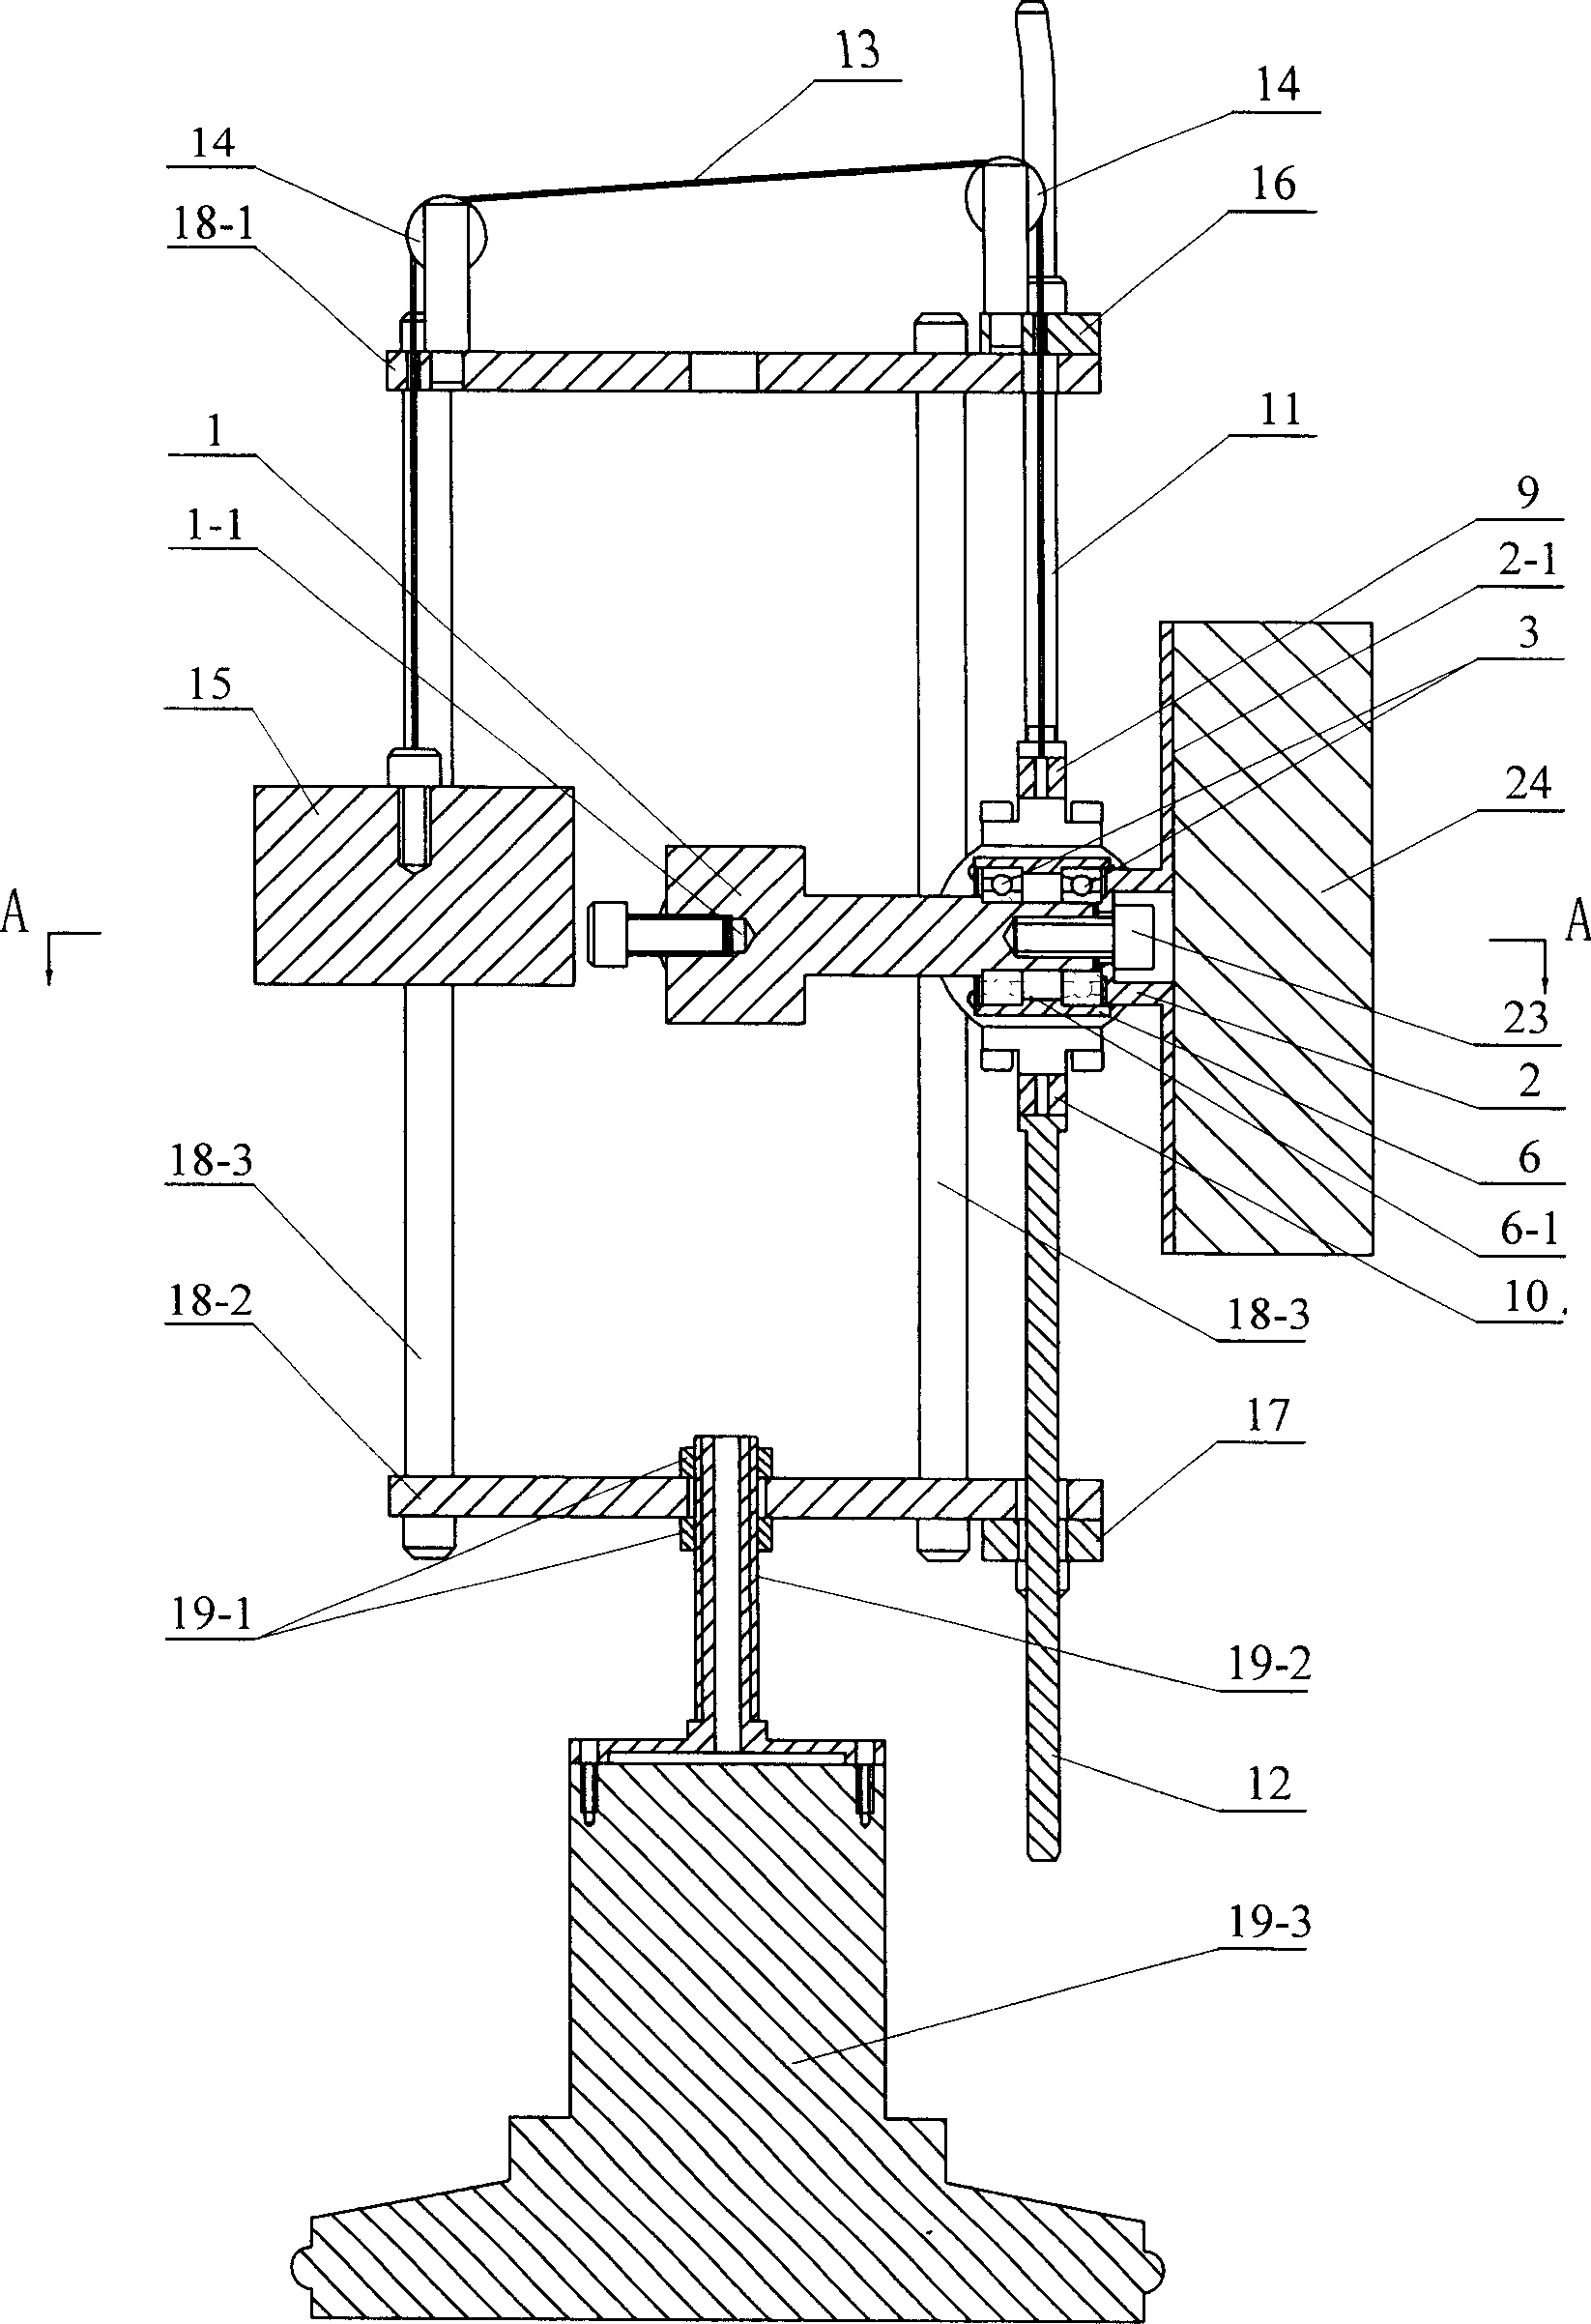 Emulated device for six-freedom degree aerial vehicle